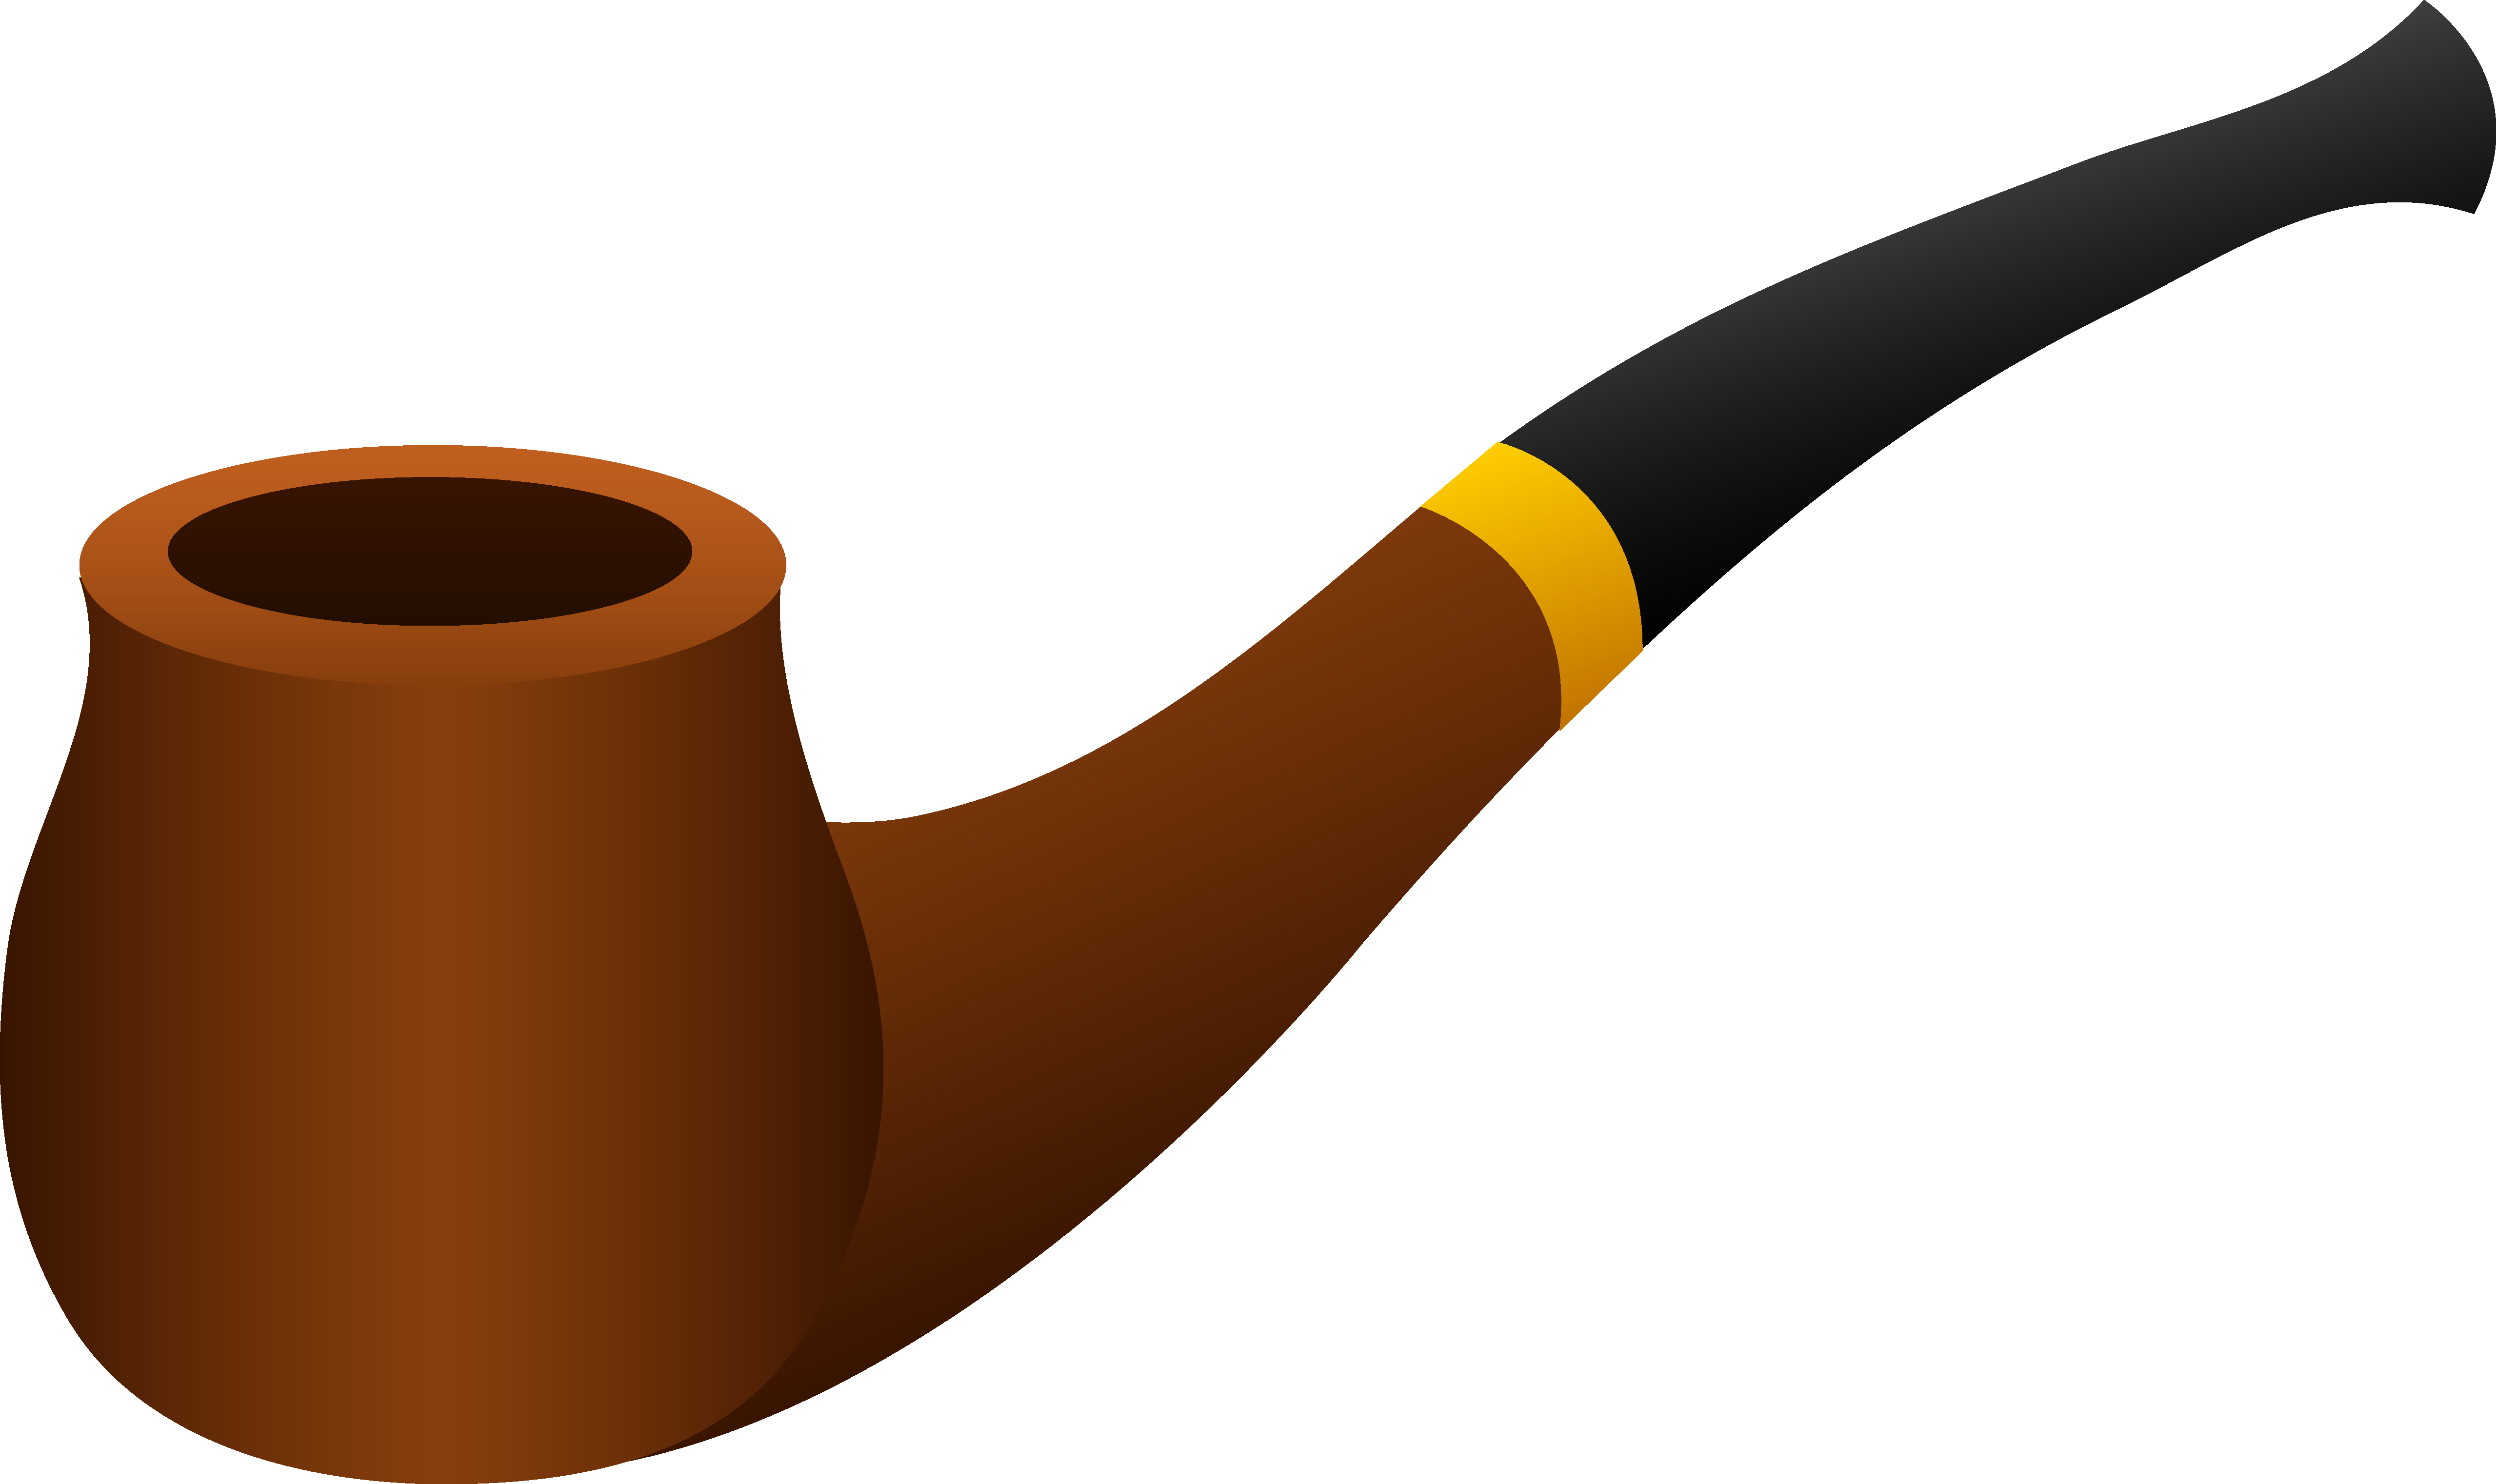 Piece of pipe clipart - Clipground